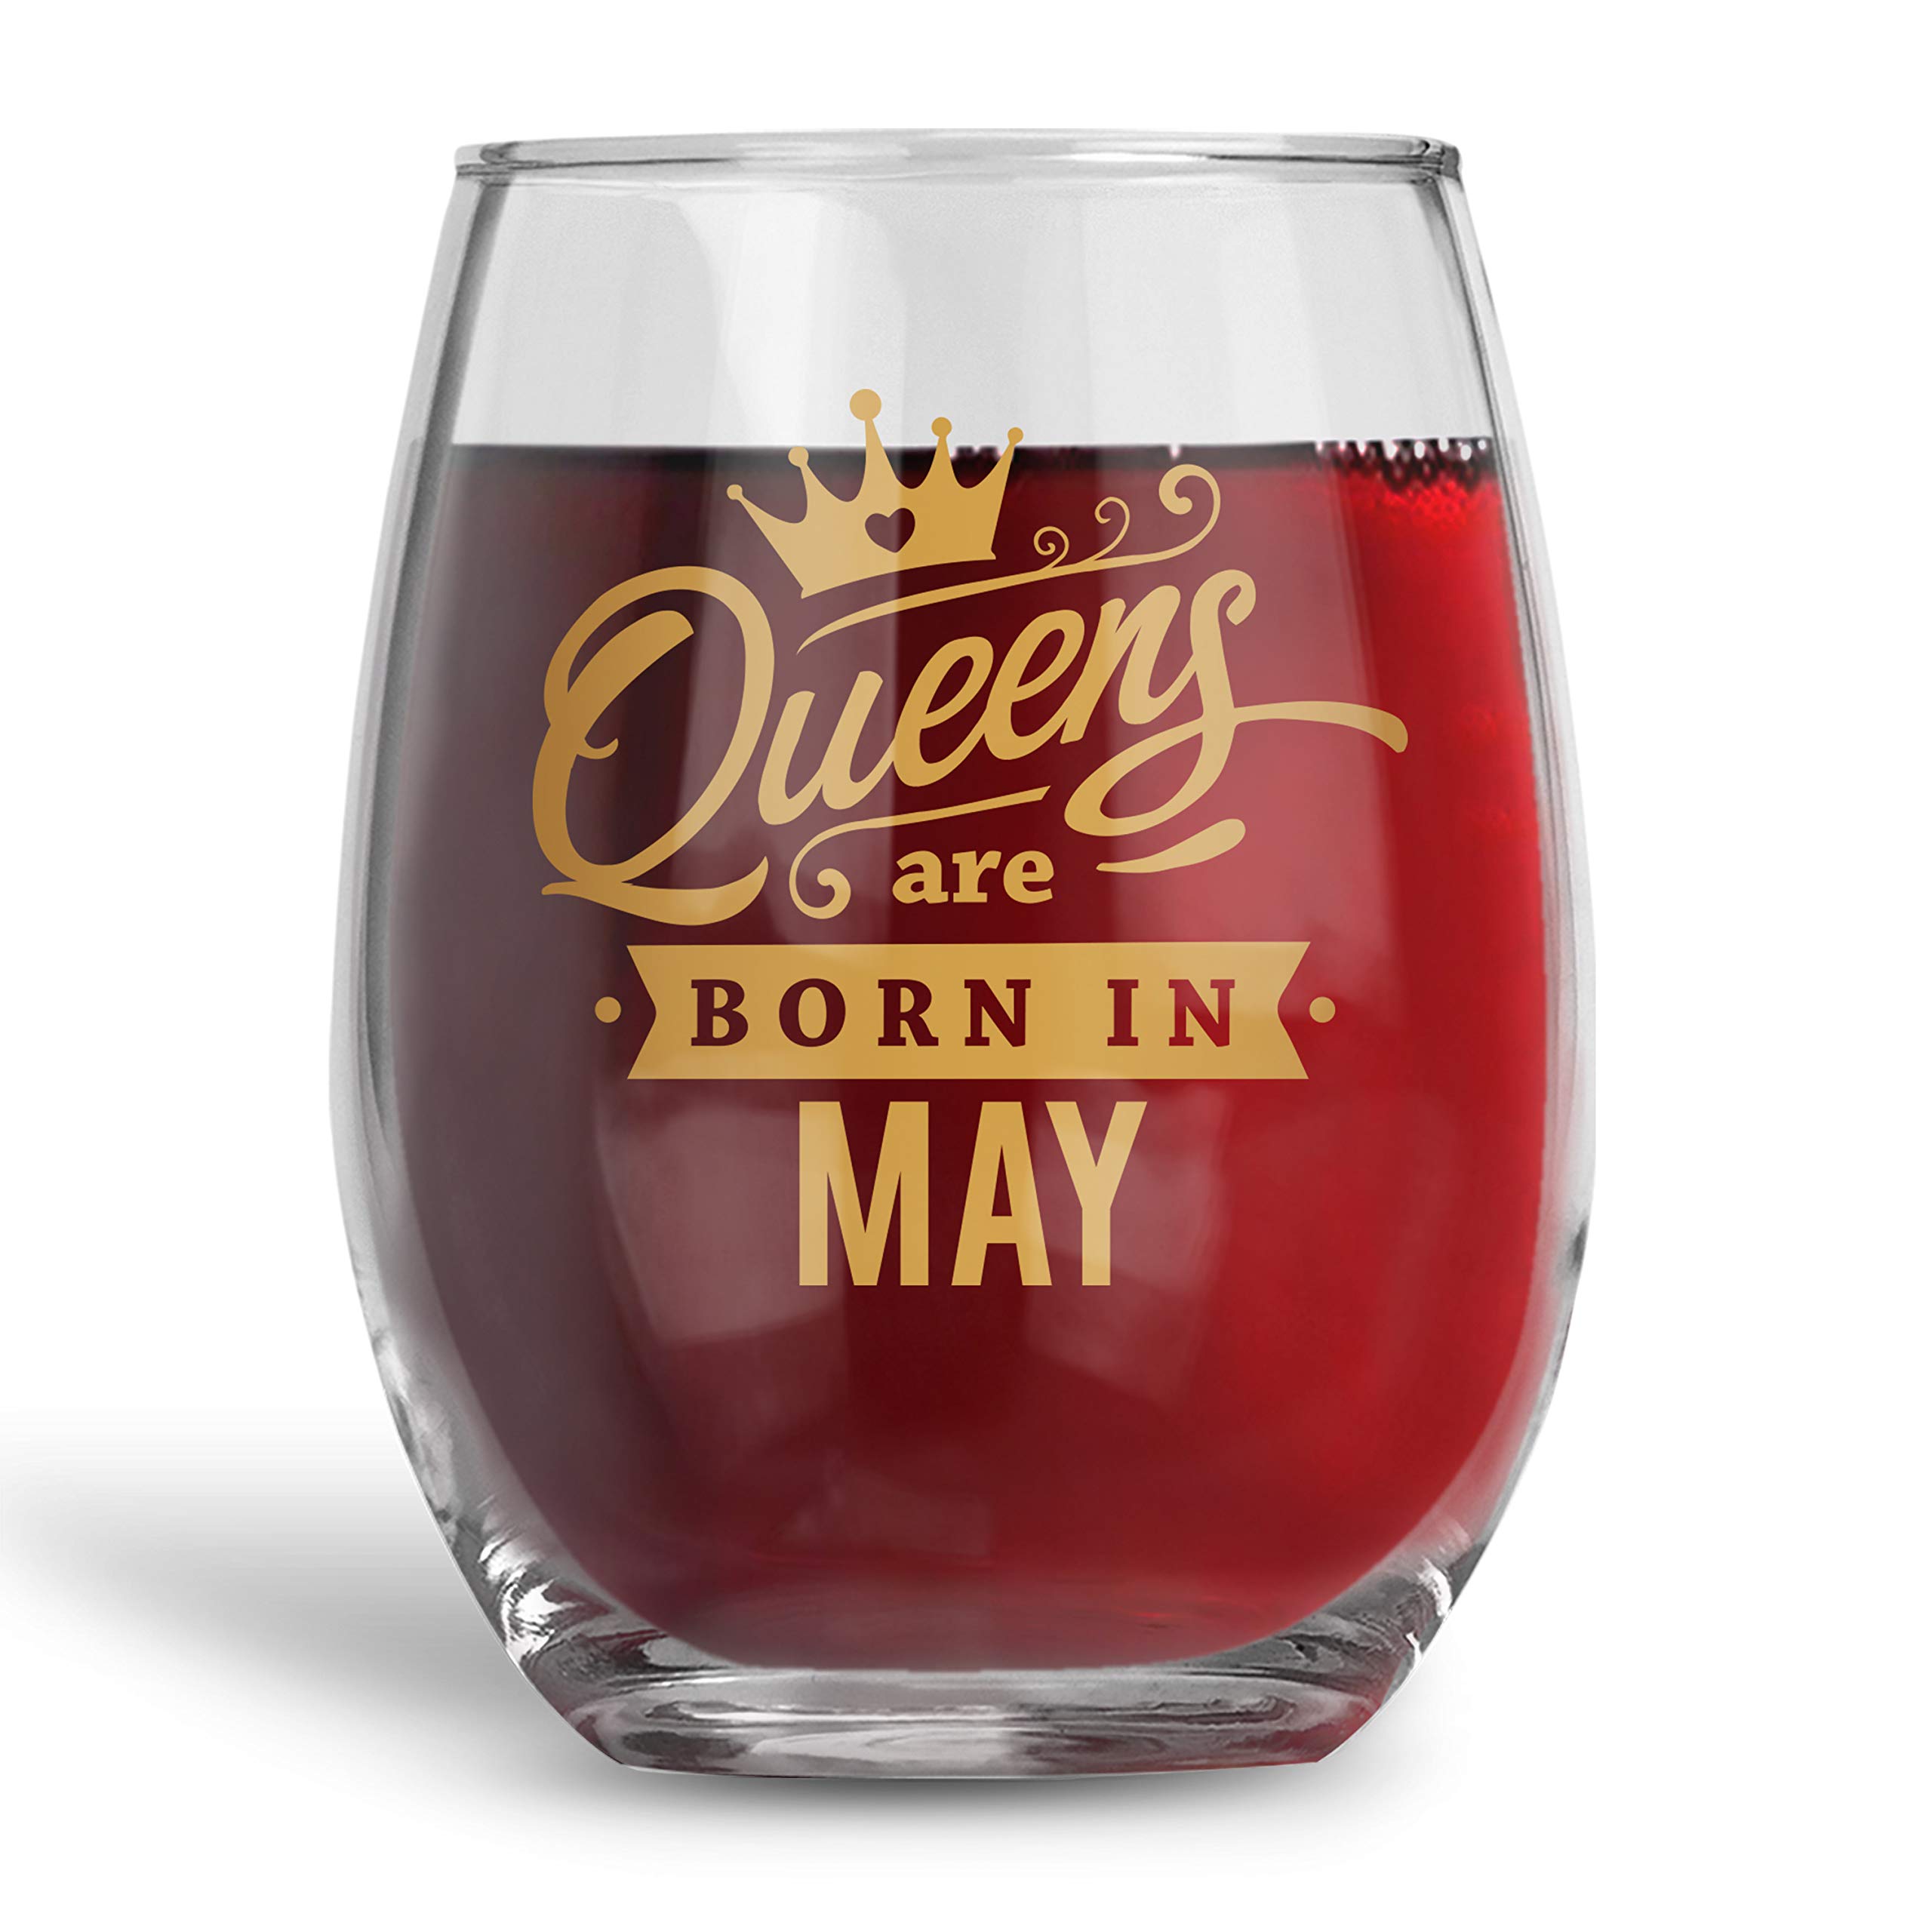 Bad Bananas Birthday Gifts For Women - Queens Are Born In May - Taurus and Gemini - 21oz Stemless Wine Glass - Unique Horoscope Gifts For Her - Happy Birthday Gifts for Moms, Best Friends, Sisters